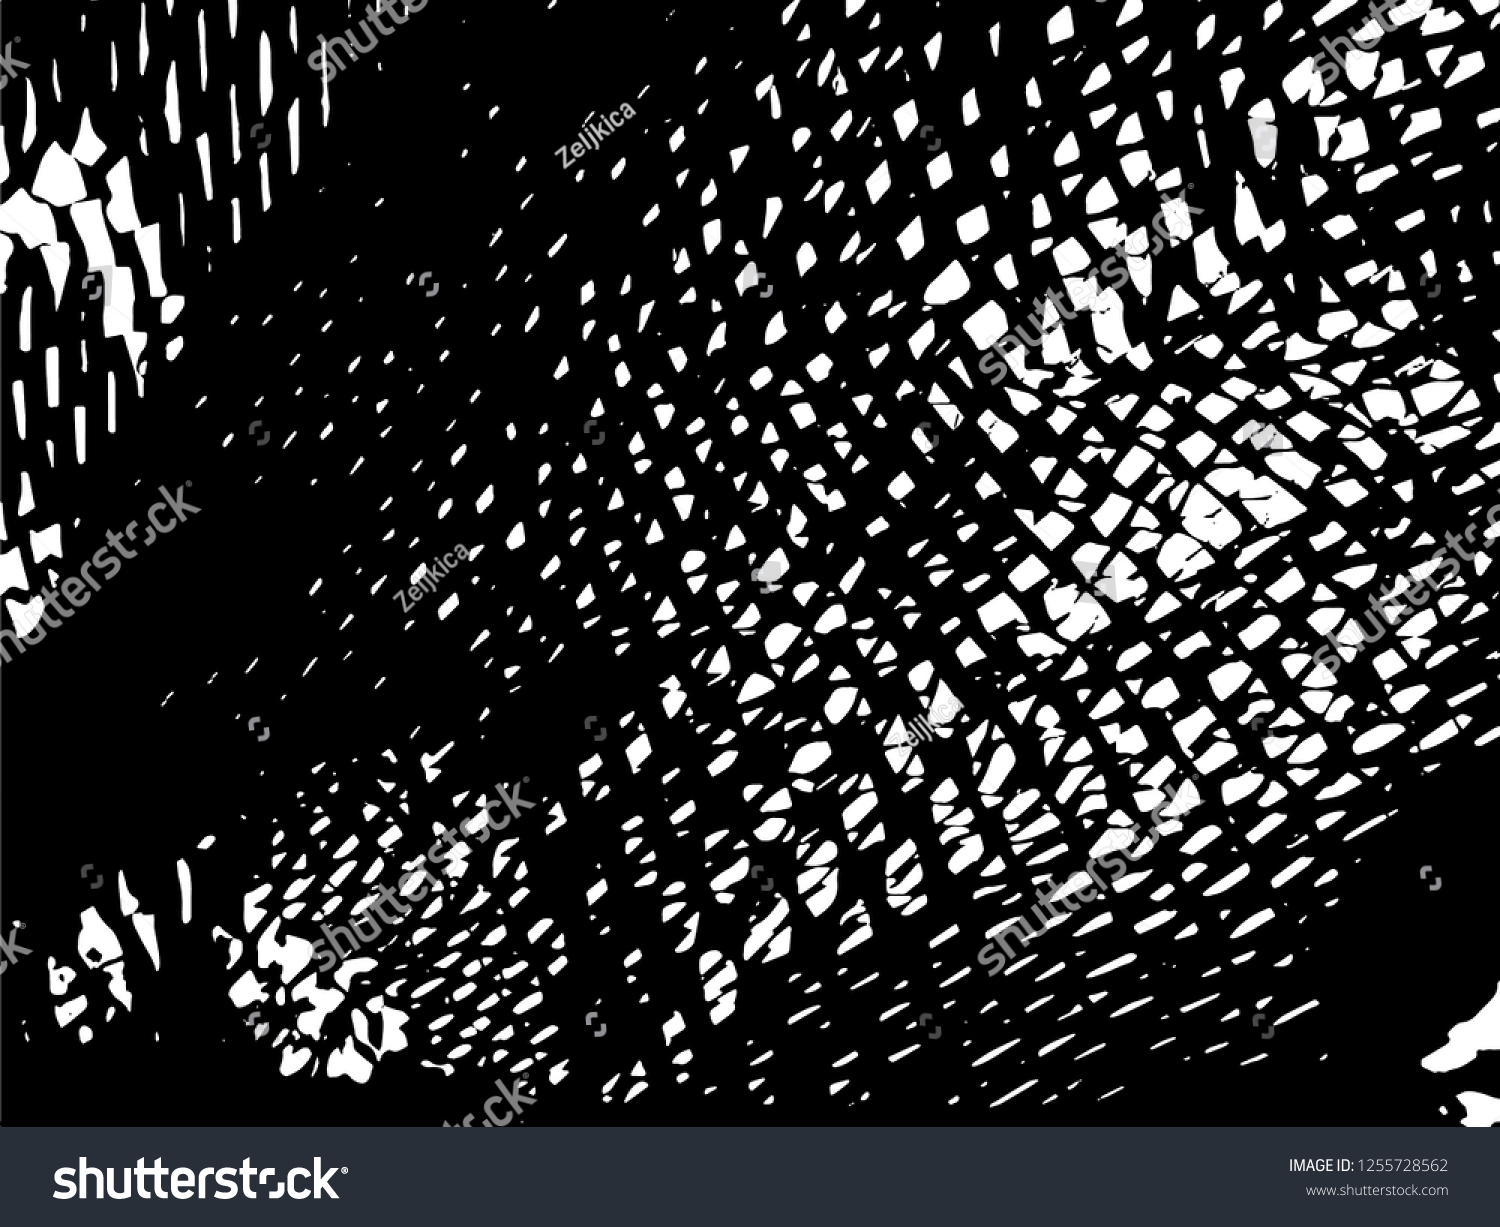 SVG of Black and white 3d vector image. Backdrop, pattern, distressed image. svg